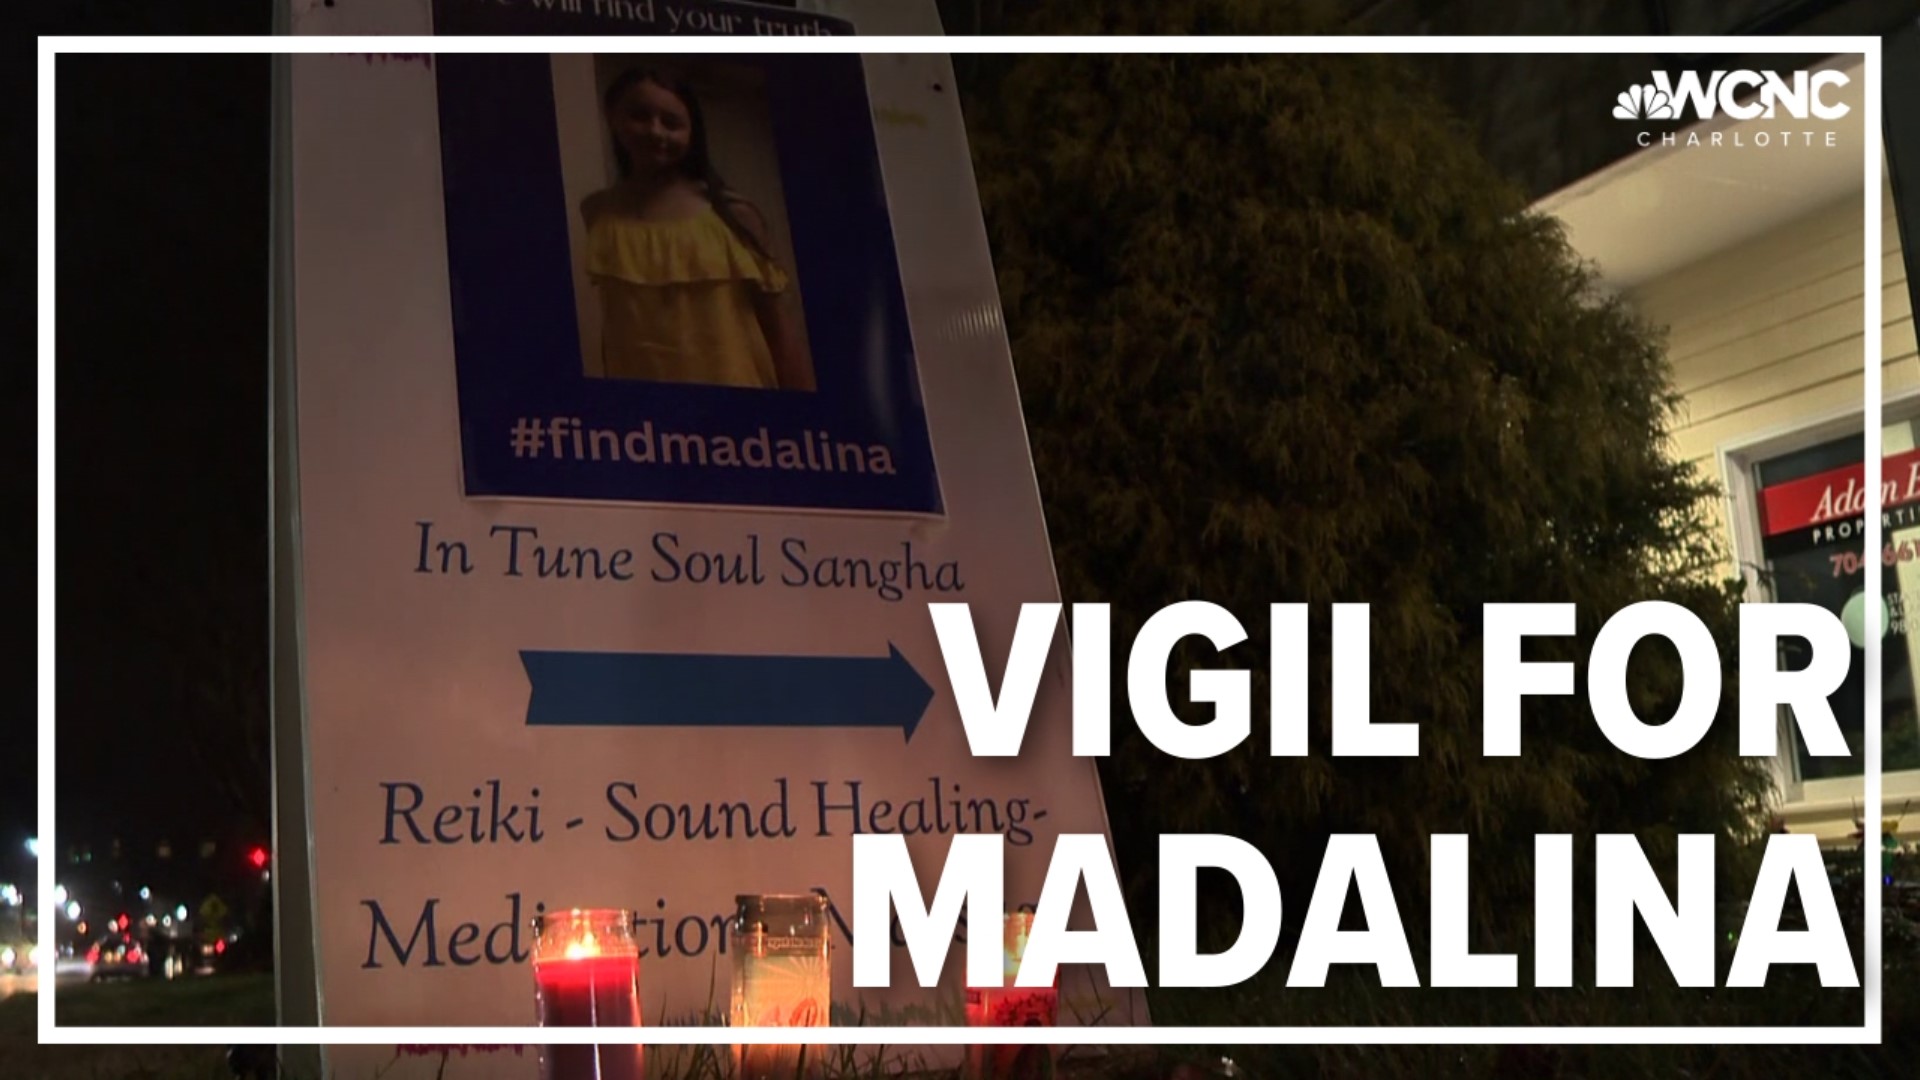 The community is coming together to make sure Madalina gets home safe.